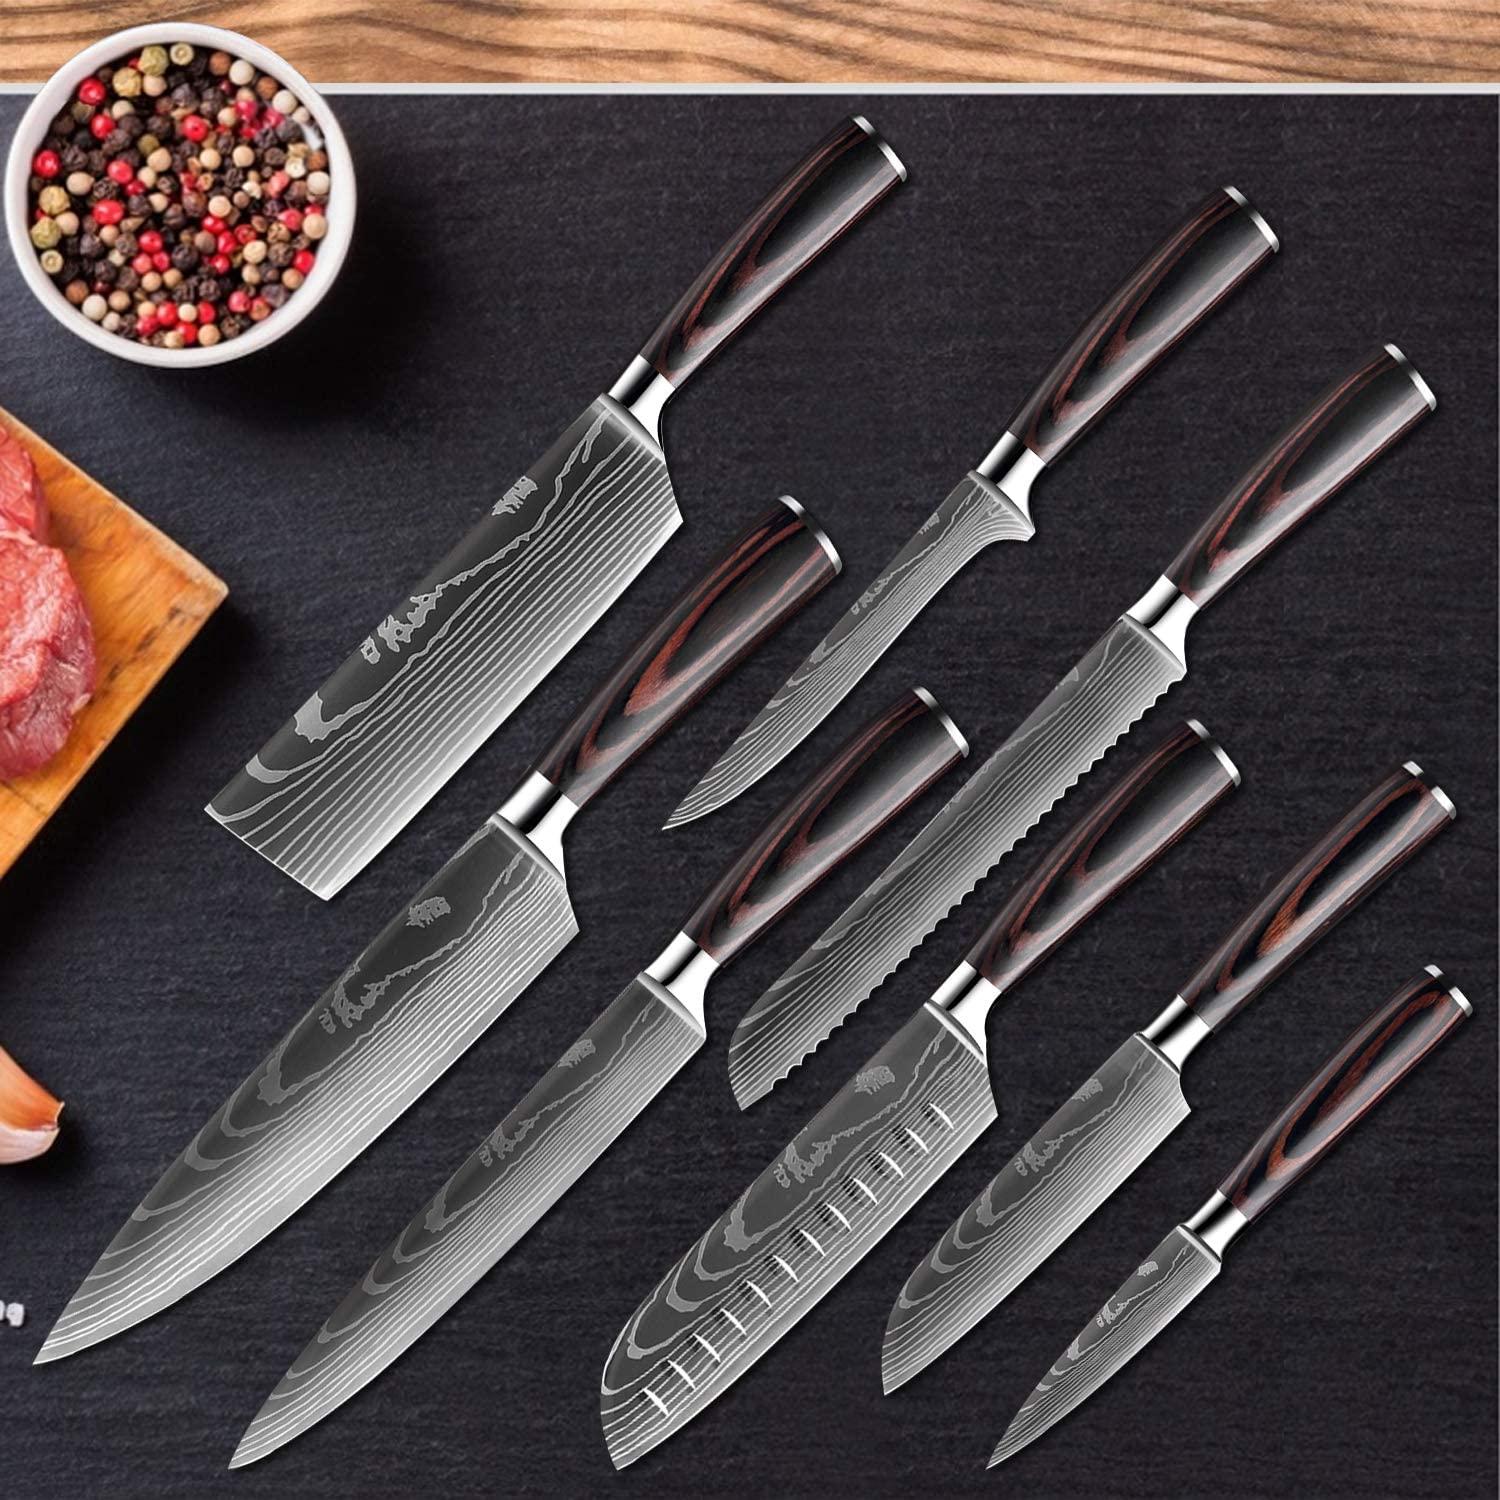 High quali Chef knife, 8 "Professional Japanese stainless steel kitchen Chef knife imitation Damascus pattern sharp slicing Gift knife